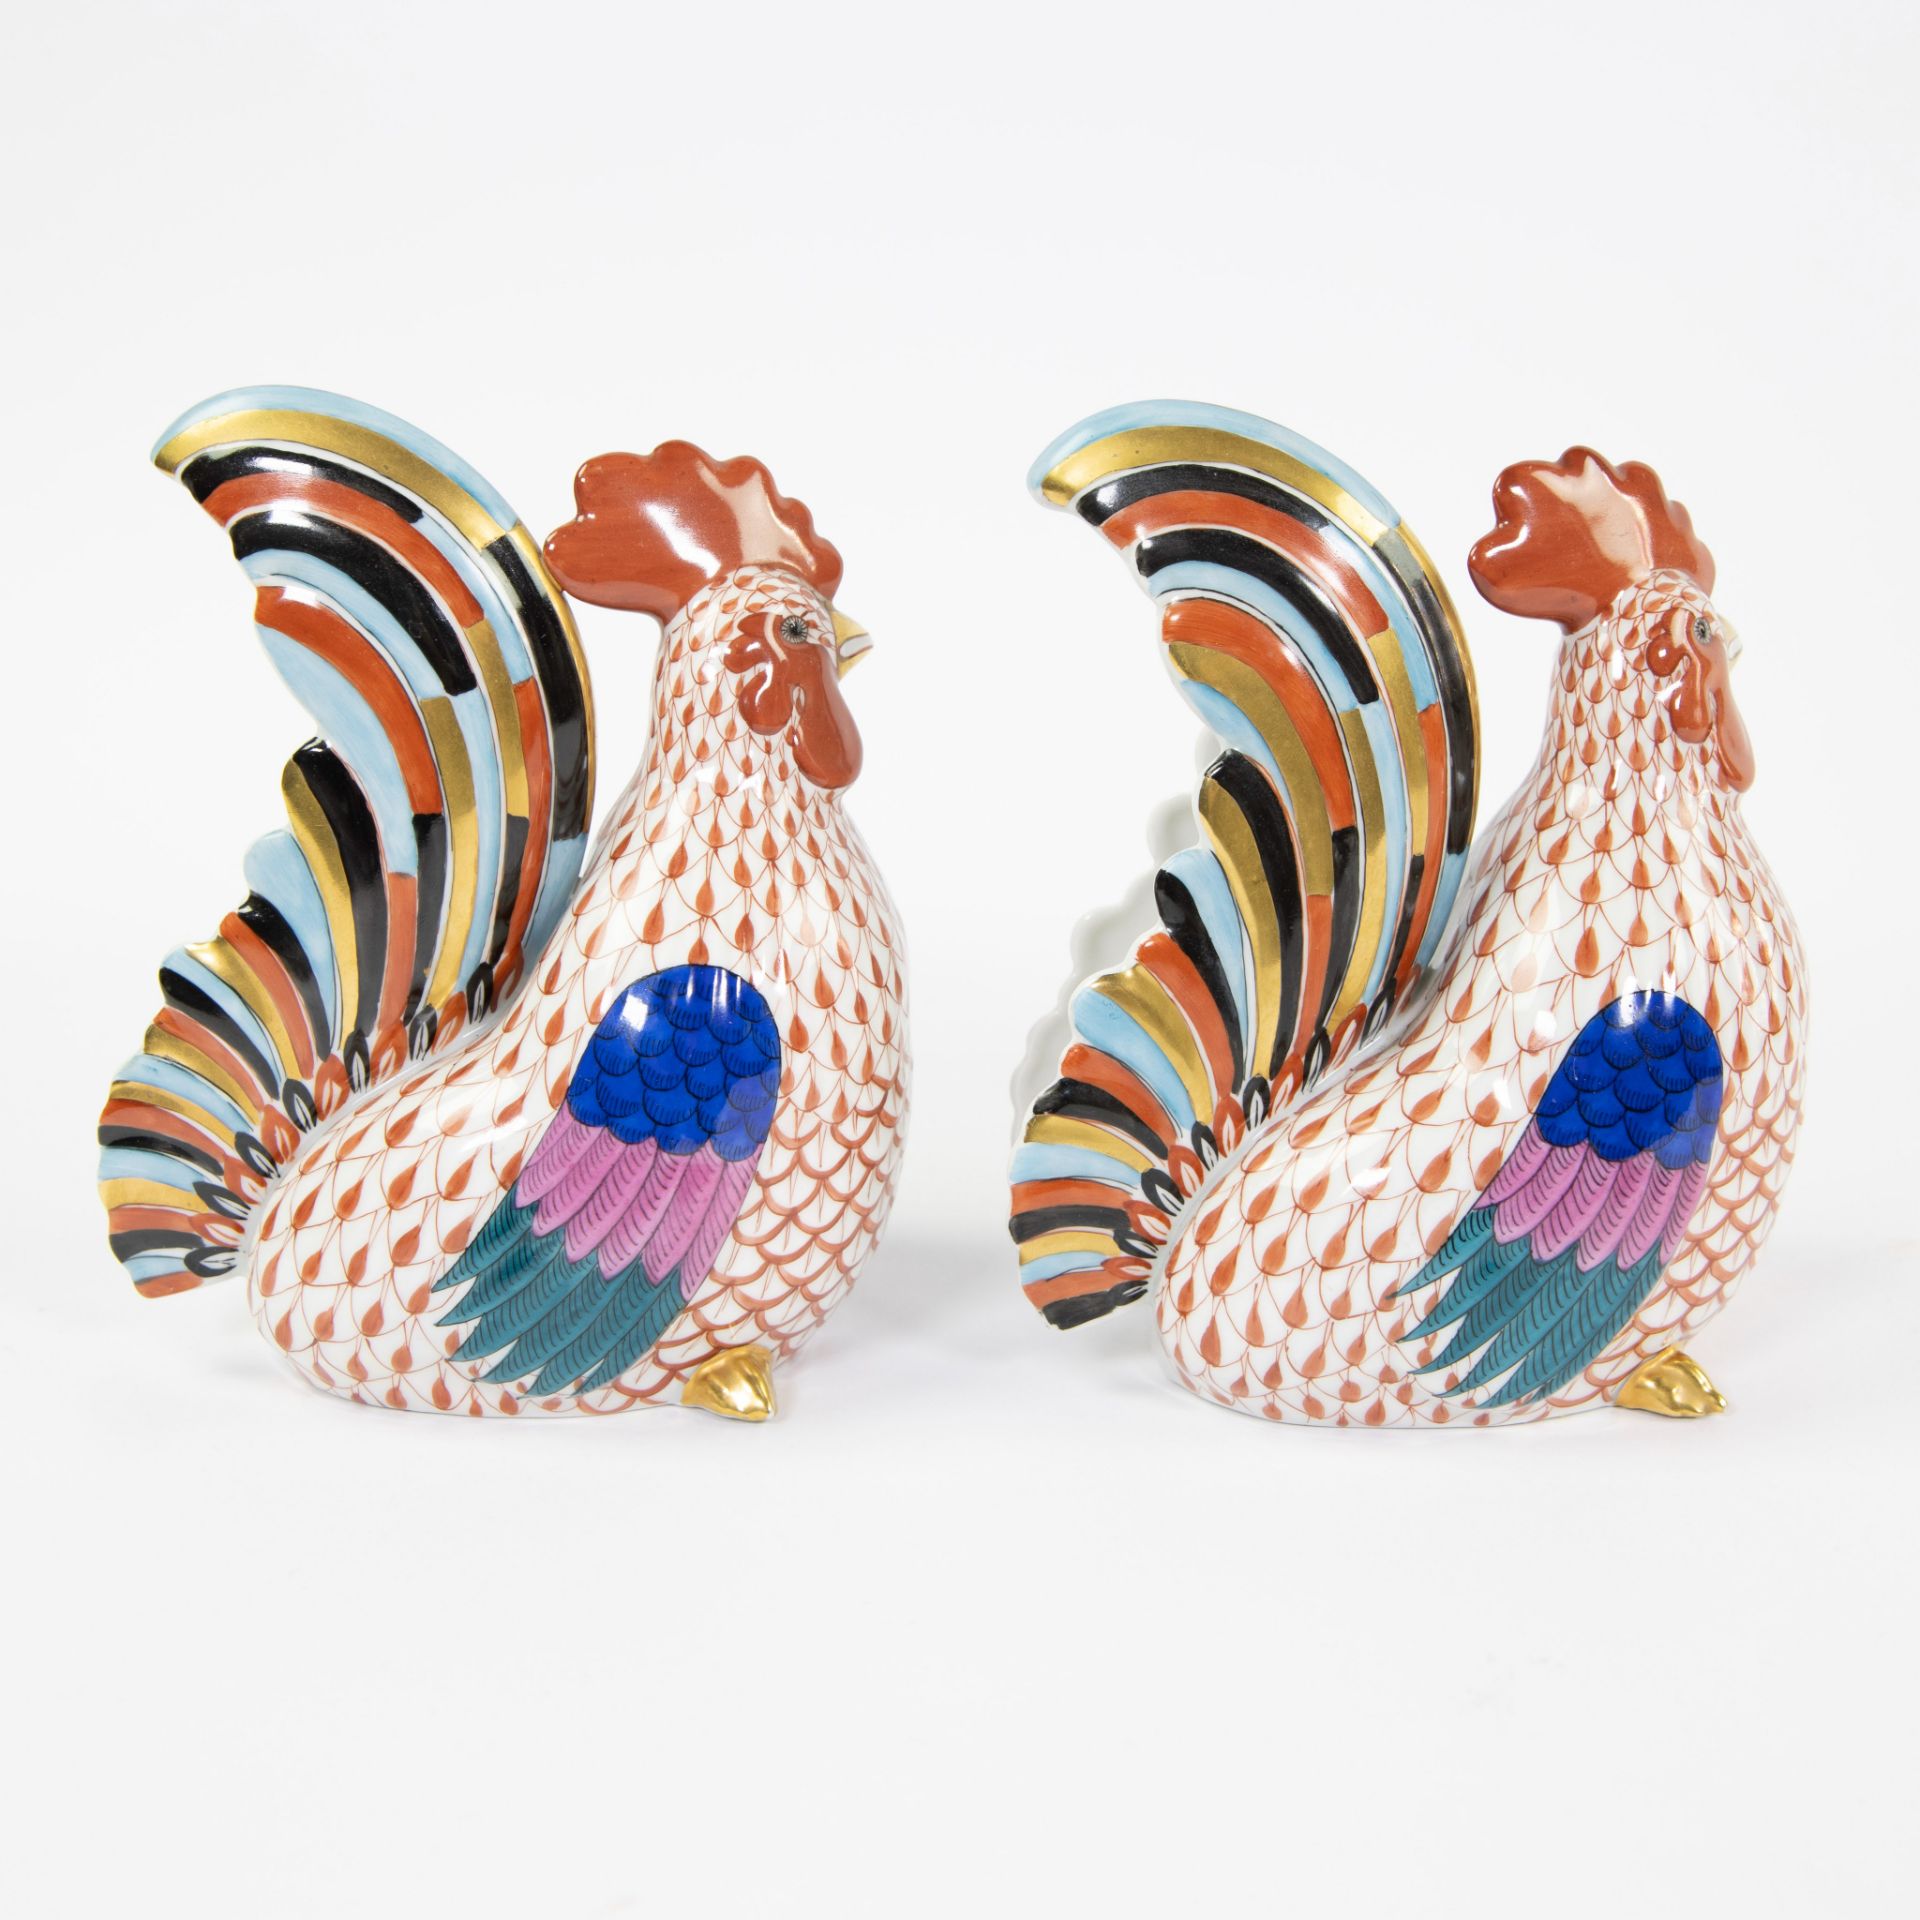 Pair of Herend roosters in porcelain hand-painted decoration in gold-green-blue-black-pink. marked. - Image 4 of 8